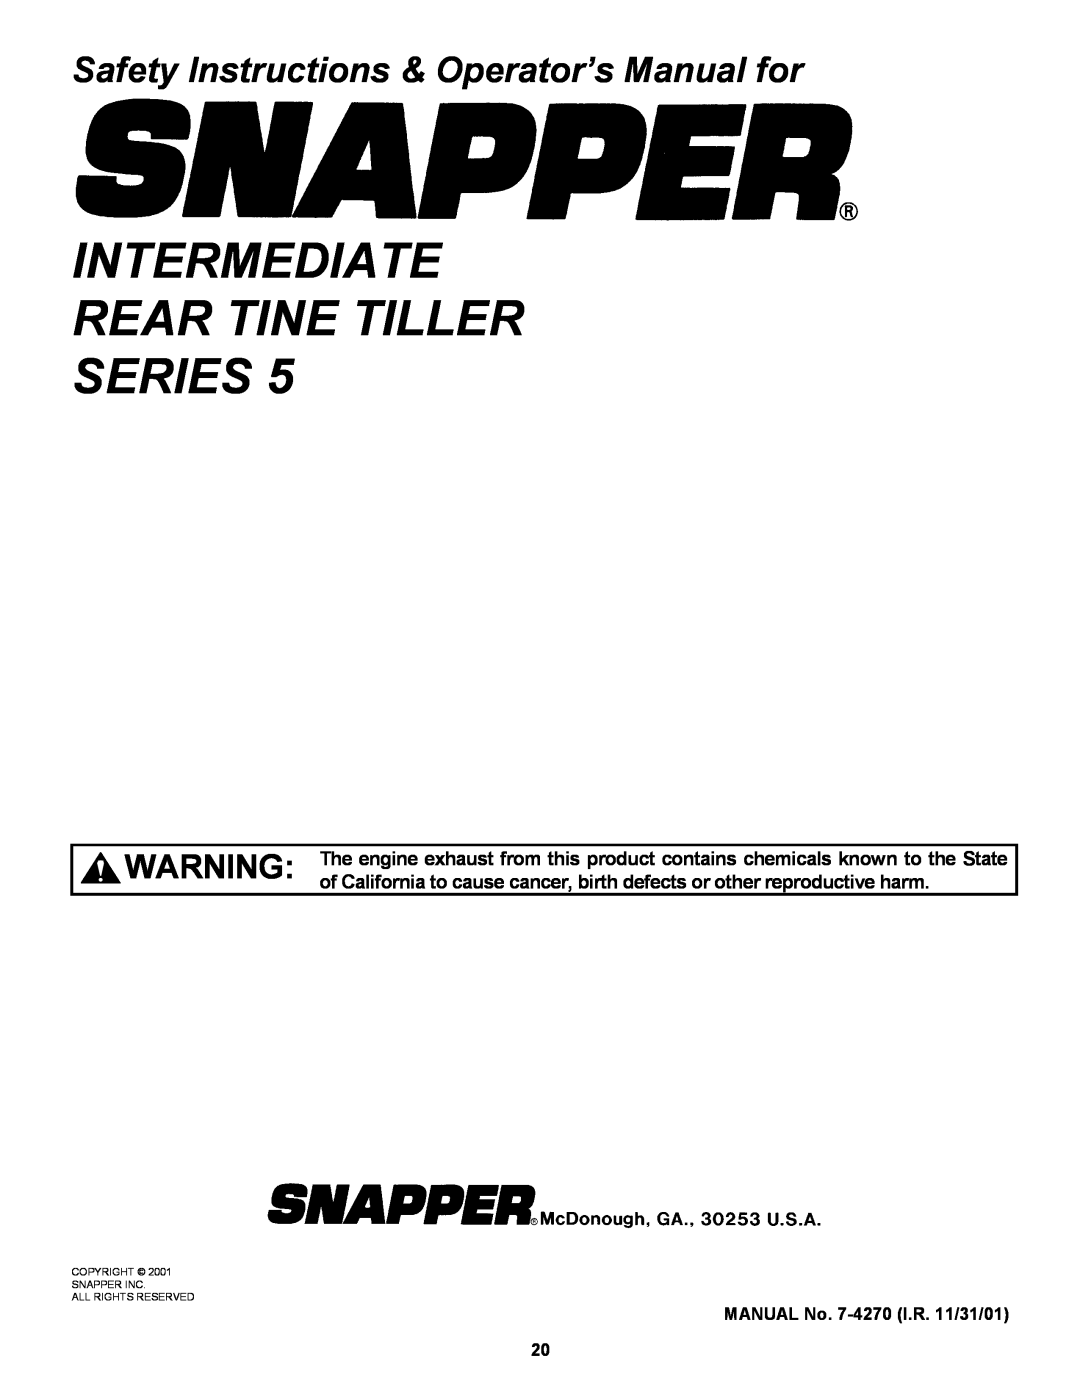 Snapper EICFR5505BV Intermediate Rear Tine Tiller Series, Safety Instructions & Operator’s Manual for 